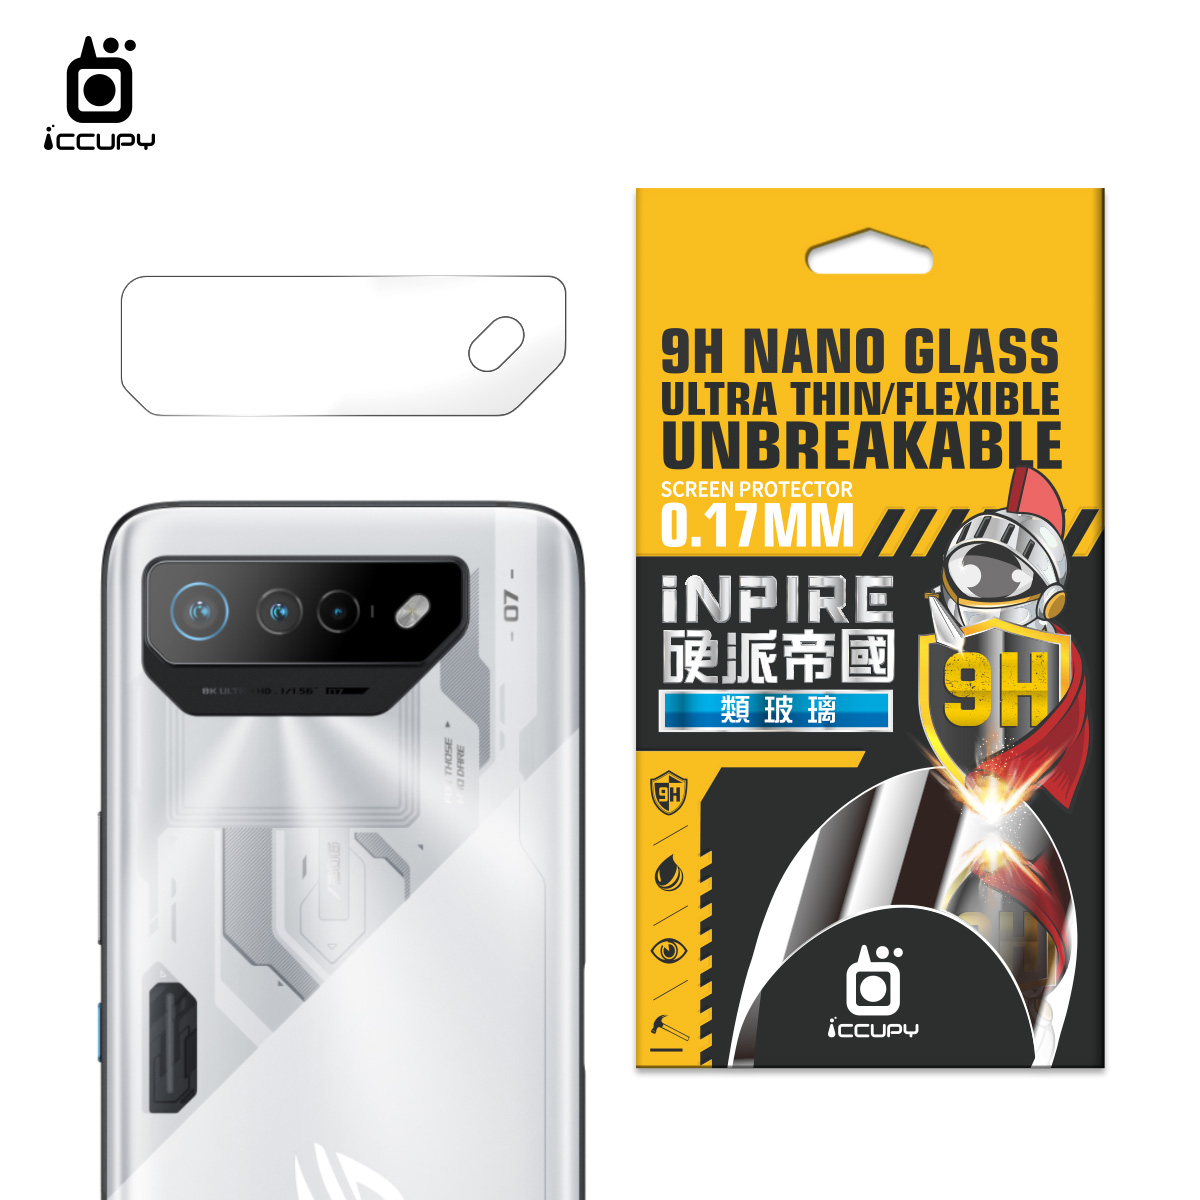 【iNPIRE】9H硬派帝國鏡頭貼(2入)FOR ASUS ROG PHONE 7(AI2205)-黑占iCCUPY